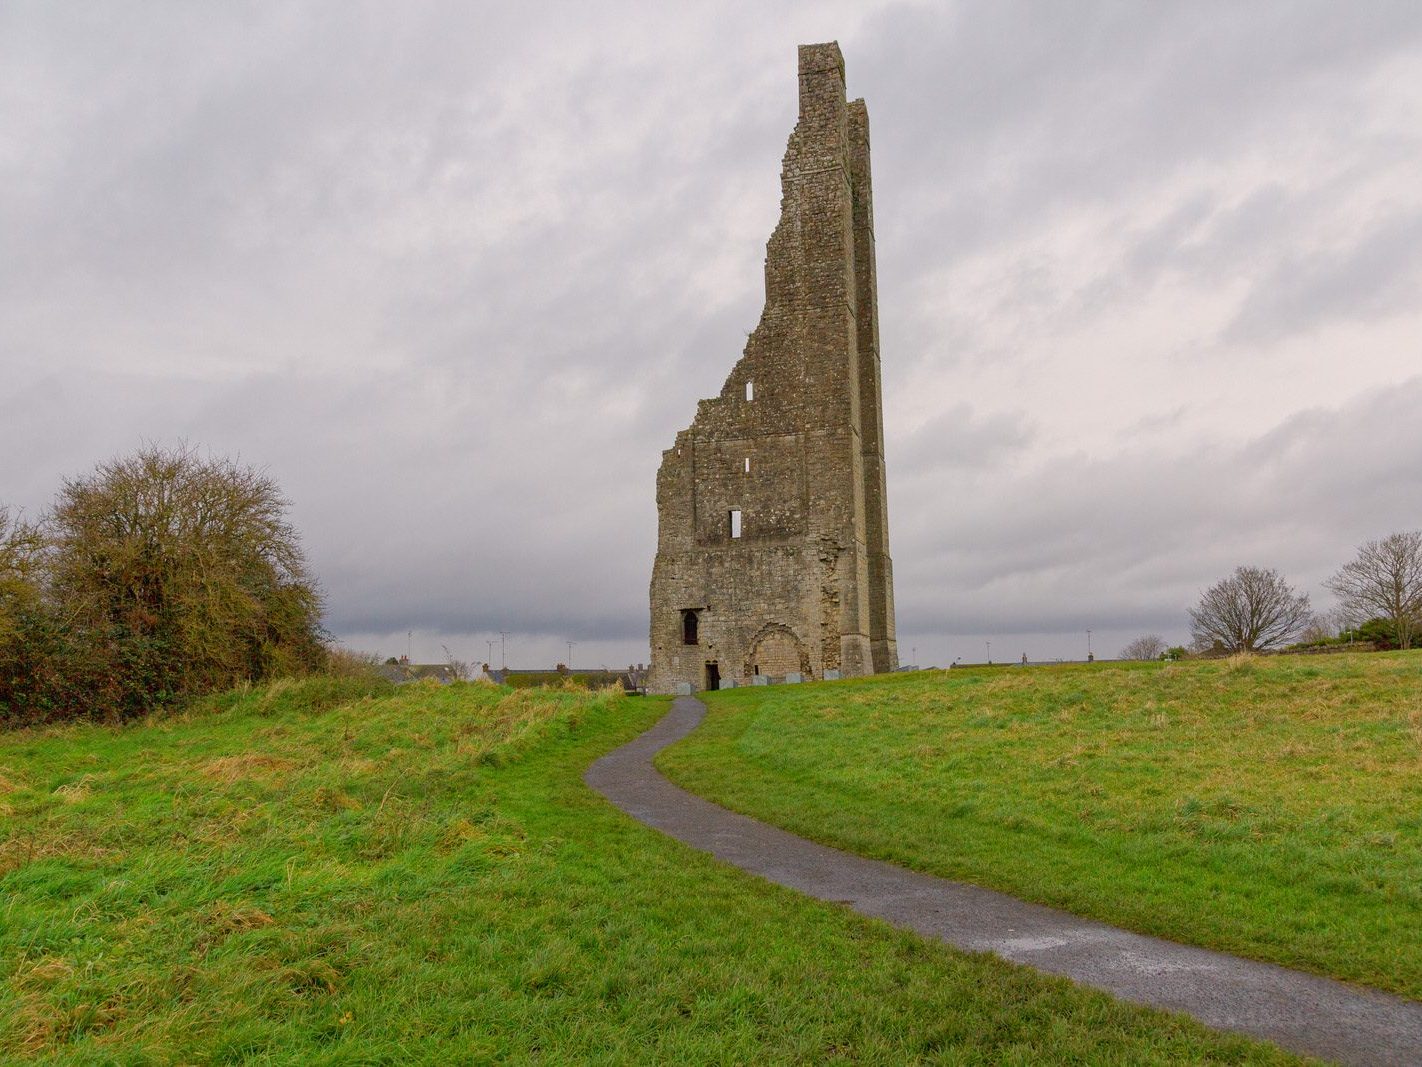 THE YELLOW STEEPLE DOMINATES THE TOWN OF TRIM [ALSO KNOWN AS ST MARYS ABBEY]-226750-1